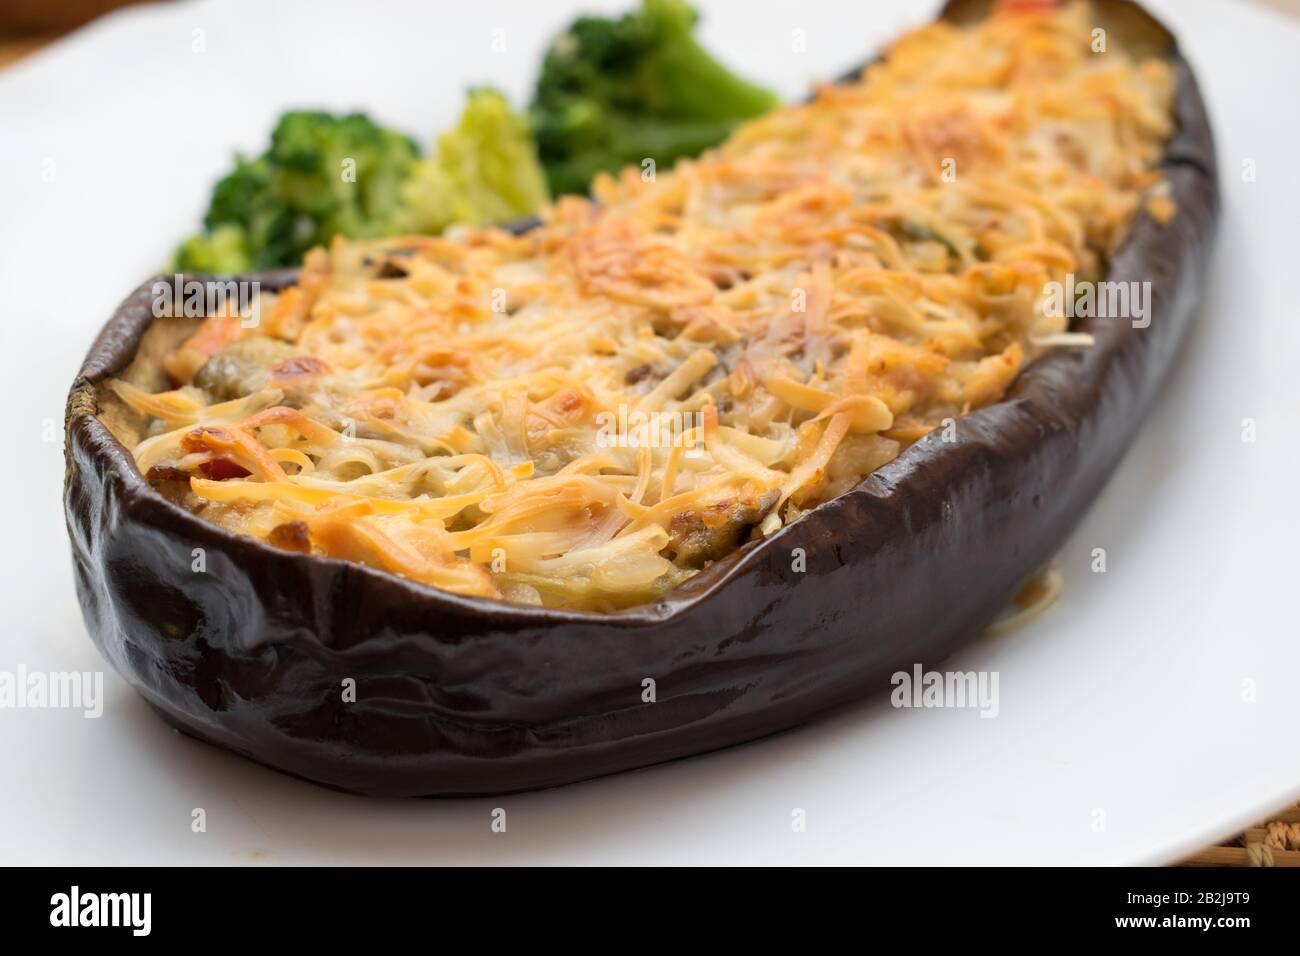 close-up of eggplant stuffed with grated cheese on top Stock Photo